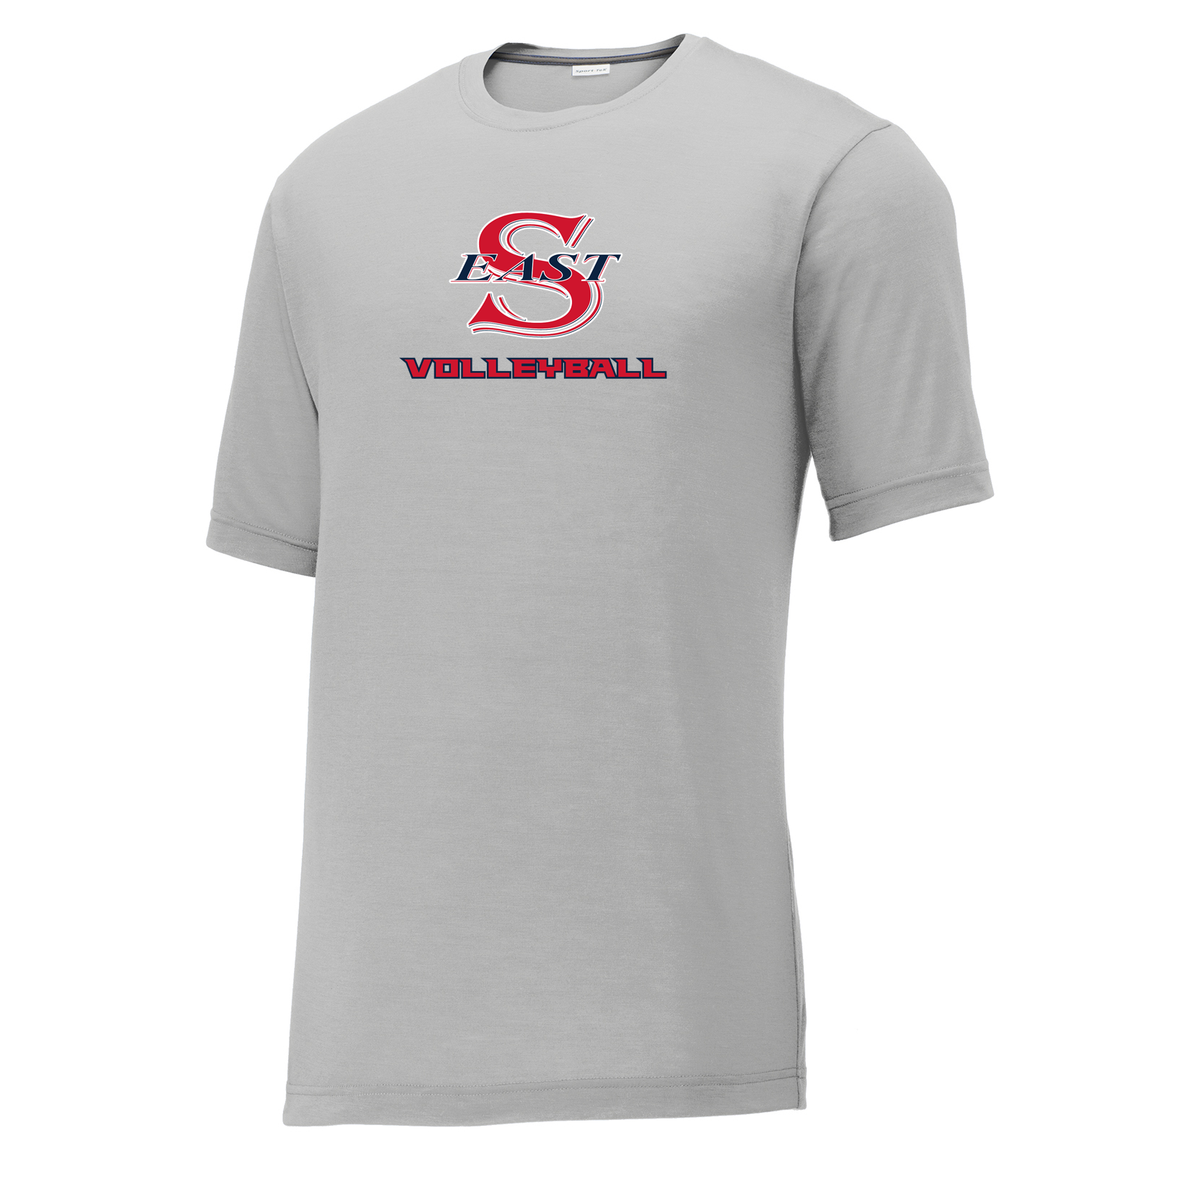 Smithtown East Volleyball CottonTouch Performance T-Shirt